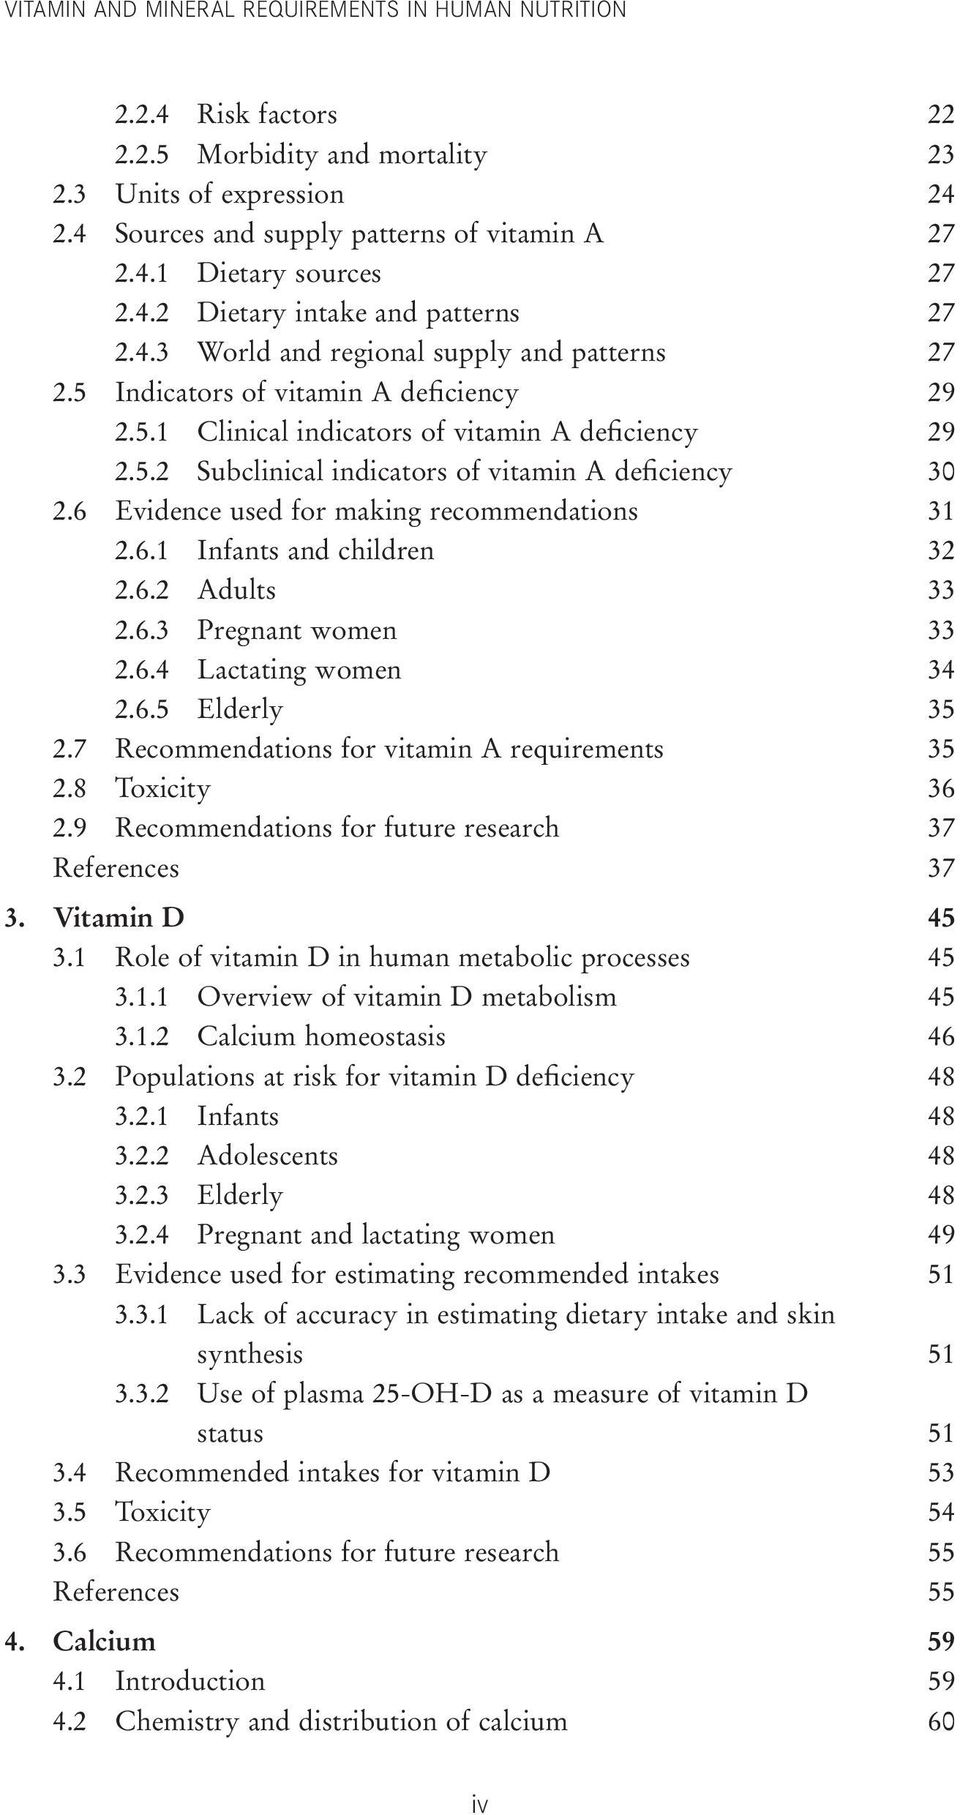 6 Evidence used for making recommendations 31 2.6.1 Infants and children 32 2.6.2 Adults 33 2.6.3 Pregnant women 33 2.6.4 Lactating women 34 2.6.5 Elderly 35 2.